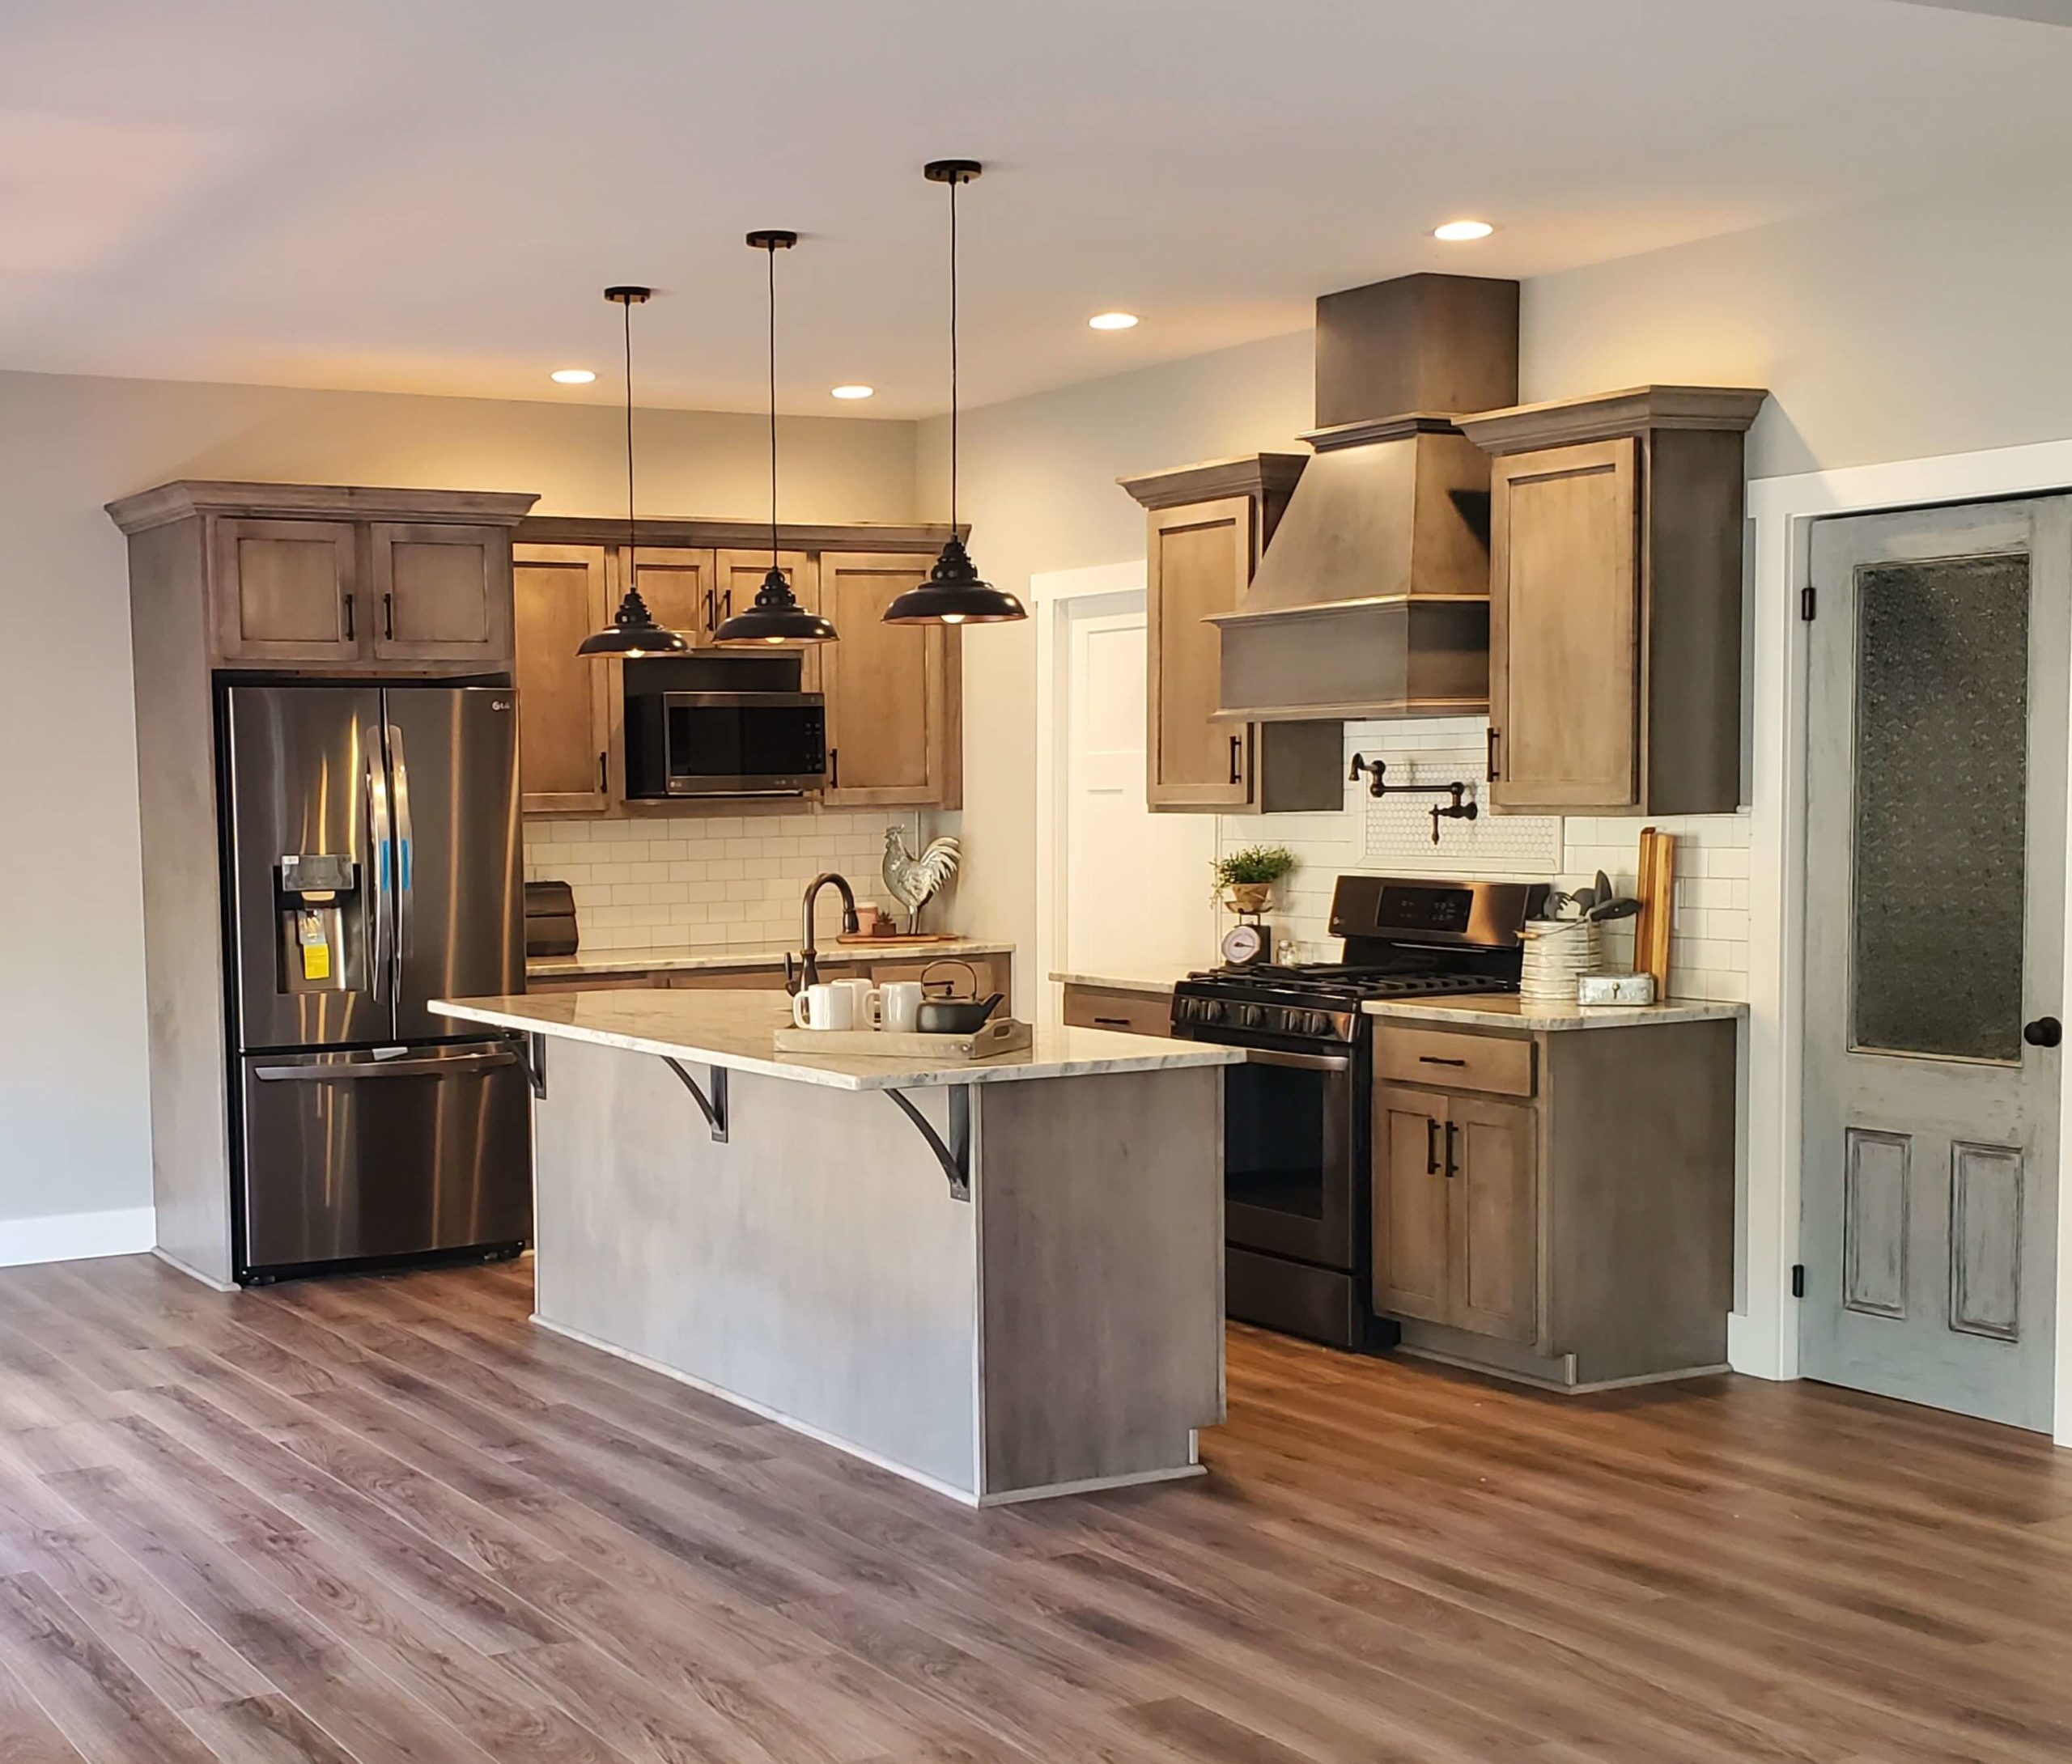 Maple Cabinets Inspiration Gallery Kitchen Express